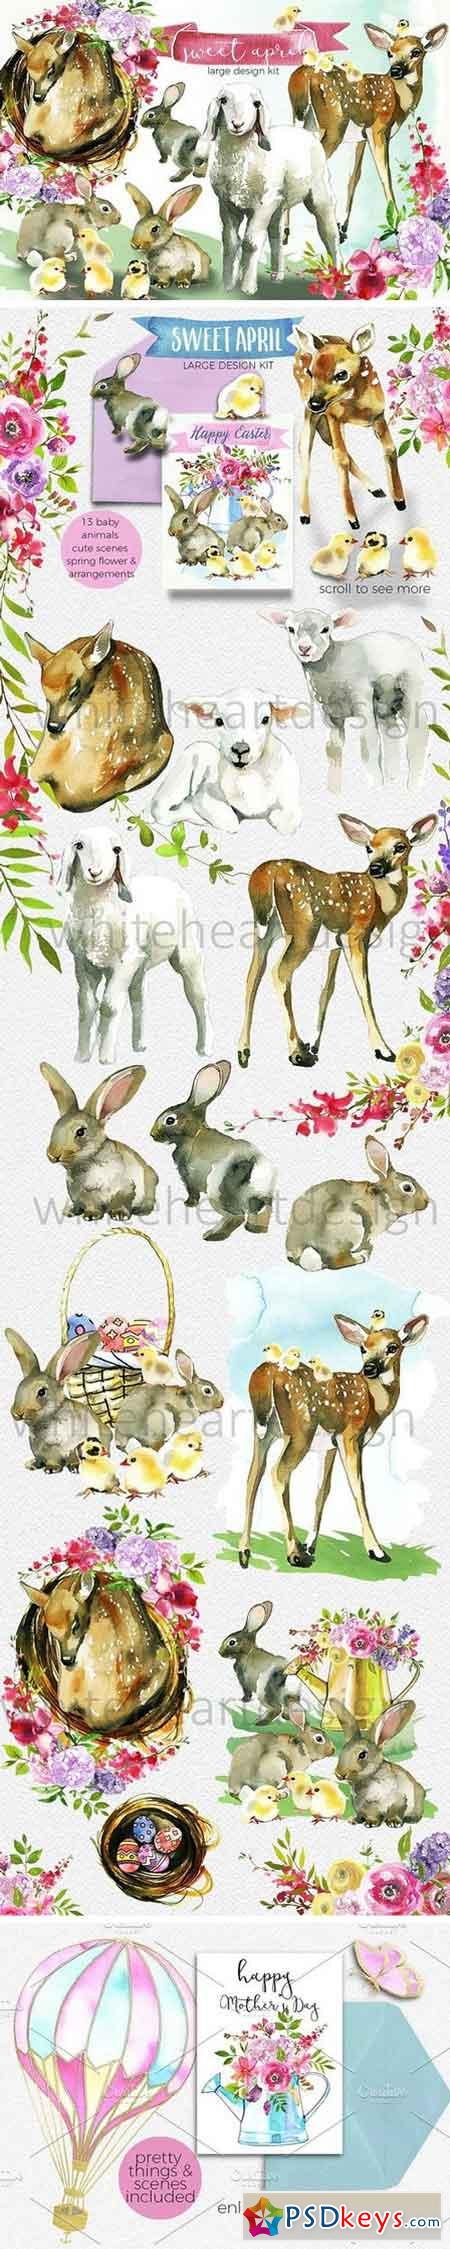 Easter Animals Flowers Clipart 1305202